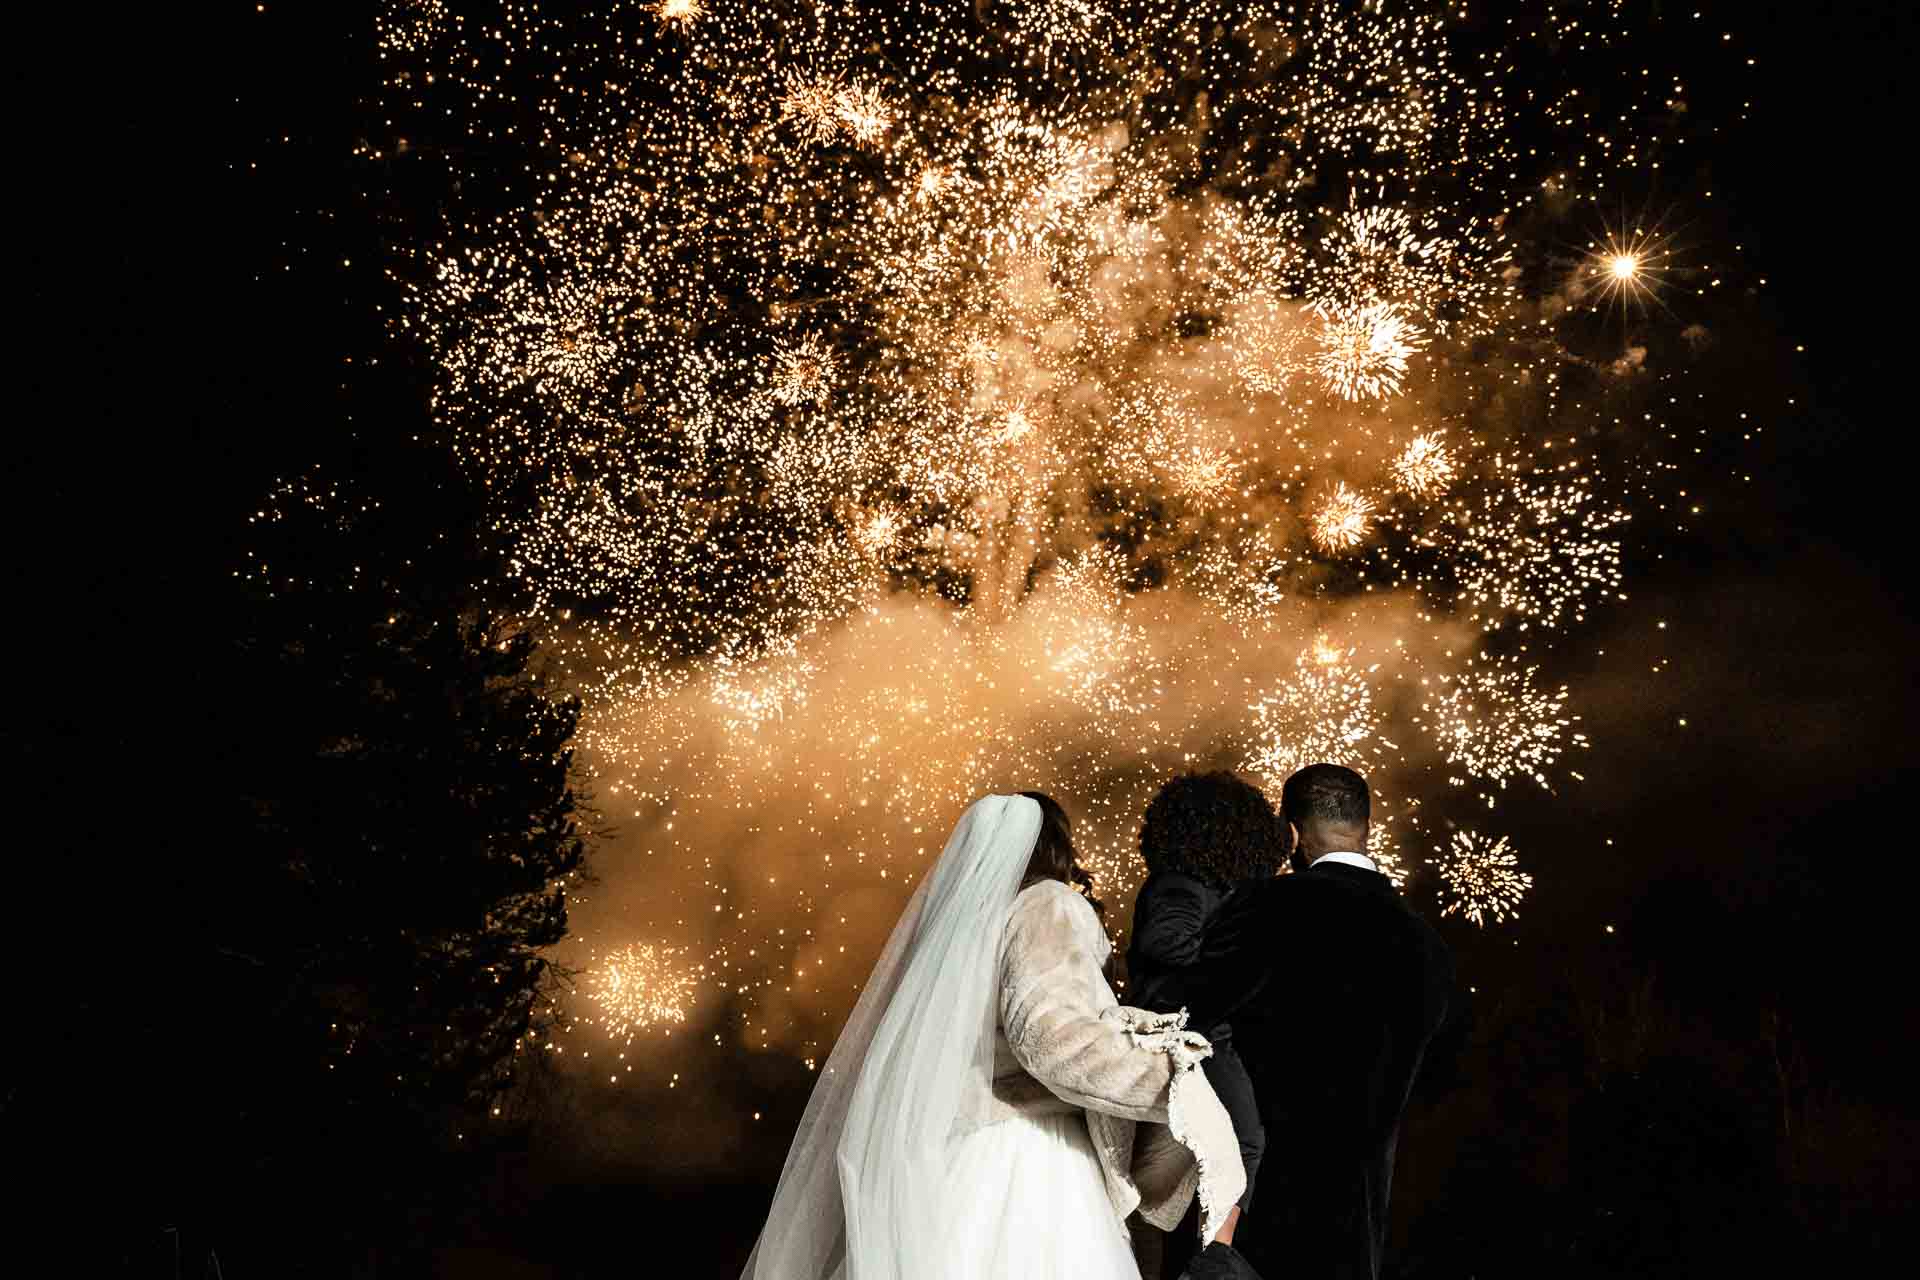 sparklers and fireworks at a wedding at the oak tree peover in cheshire